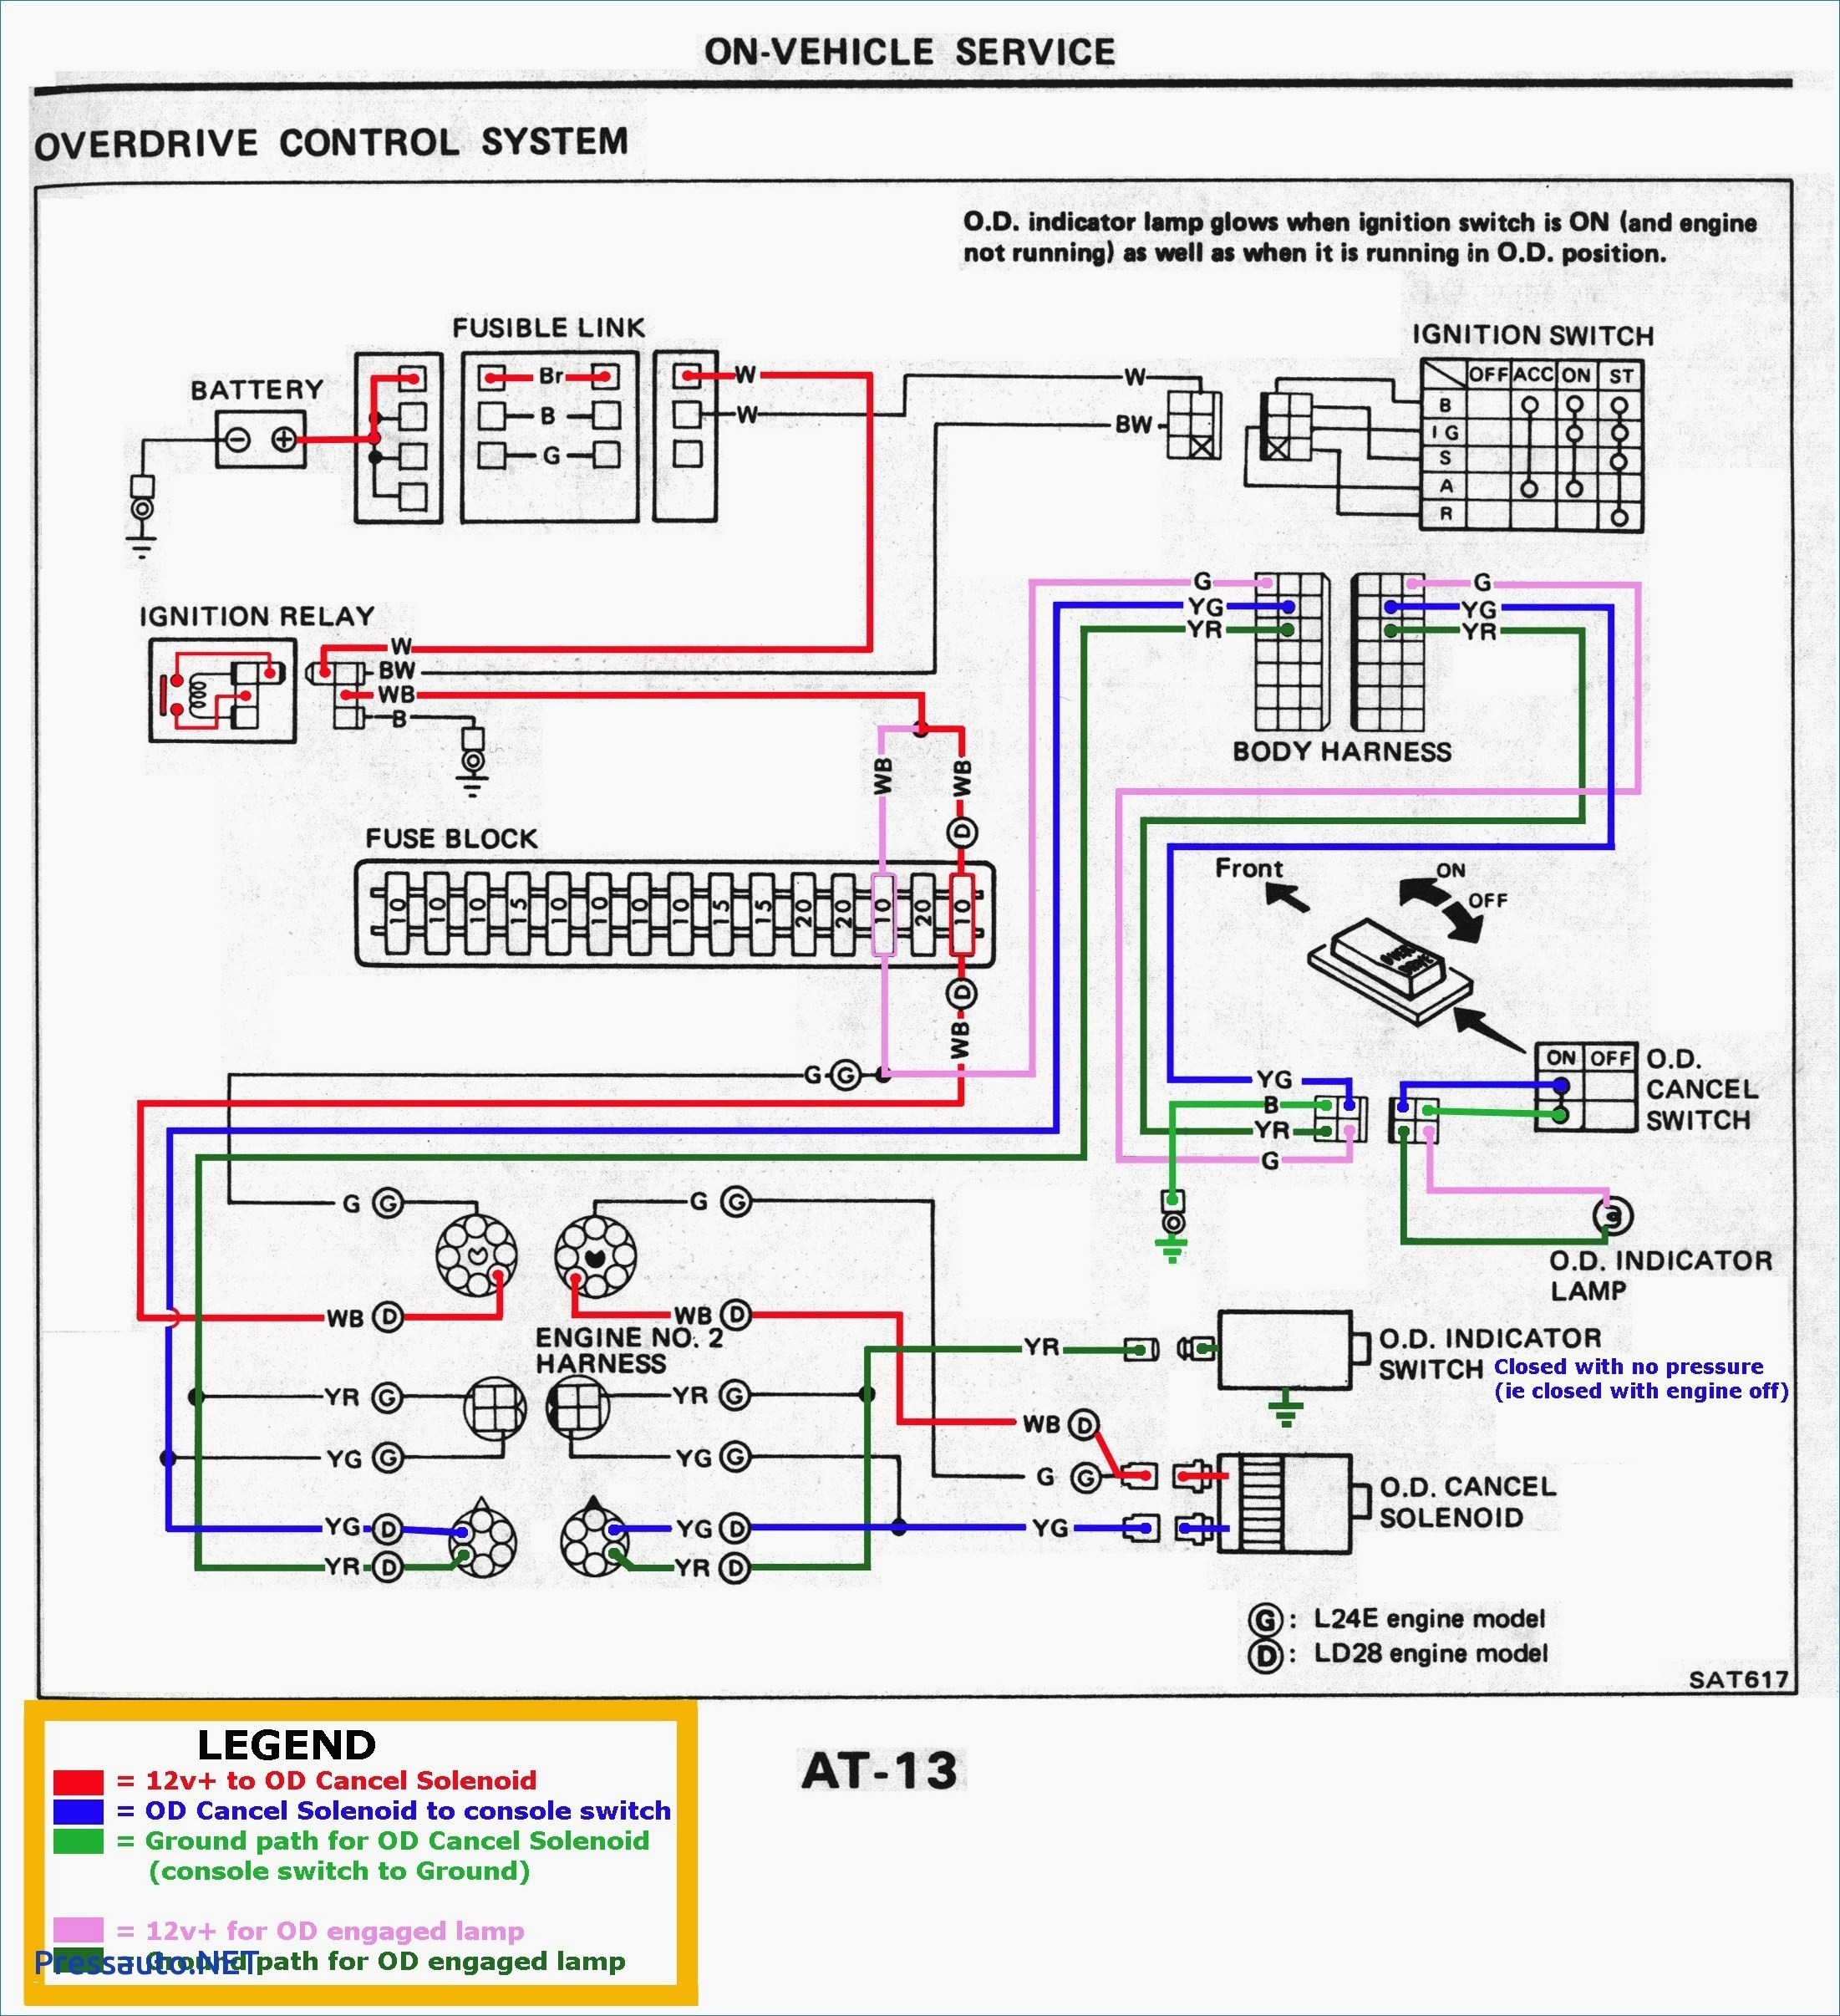 Wiring Diagram Light Relay Inspirationa Lawn Mower Ignition Switch Ignition Switch Wiring Diagram Download